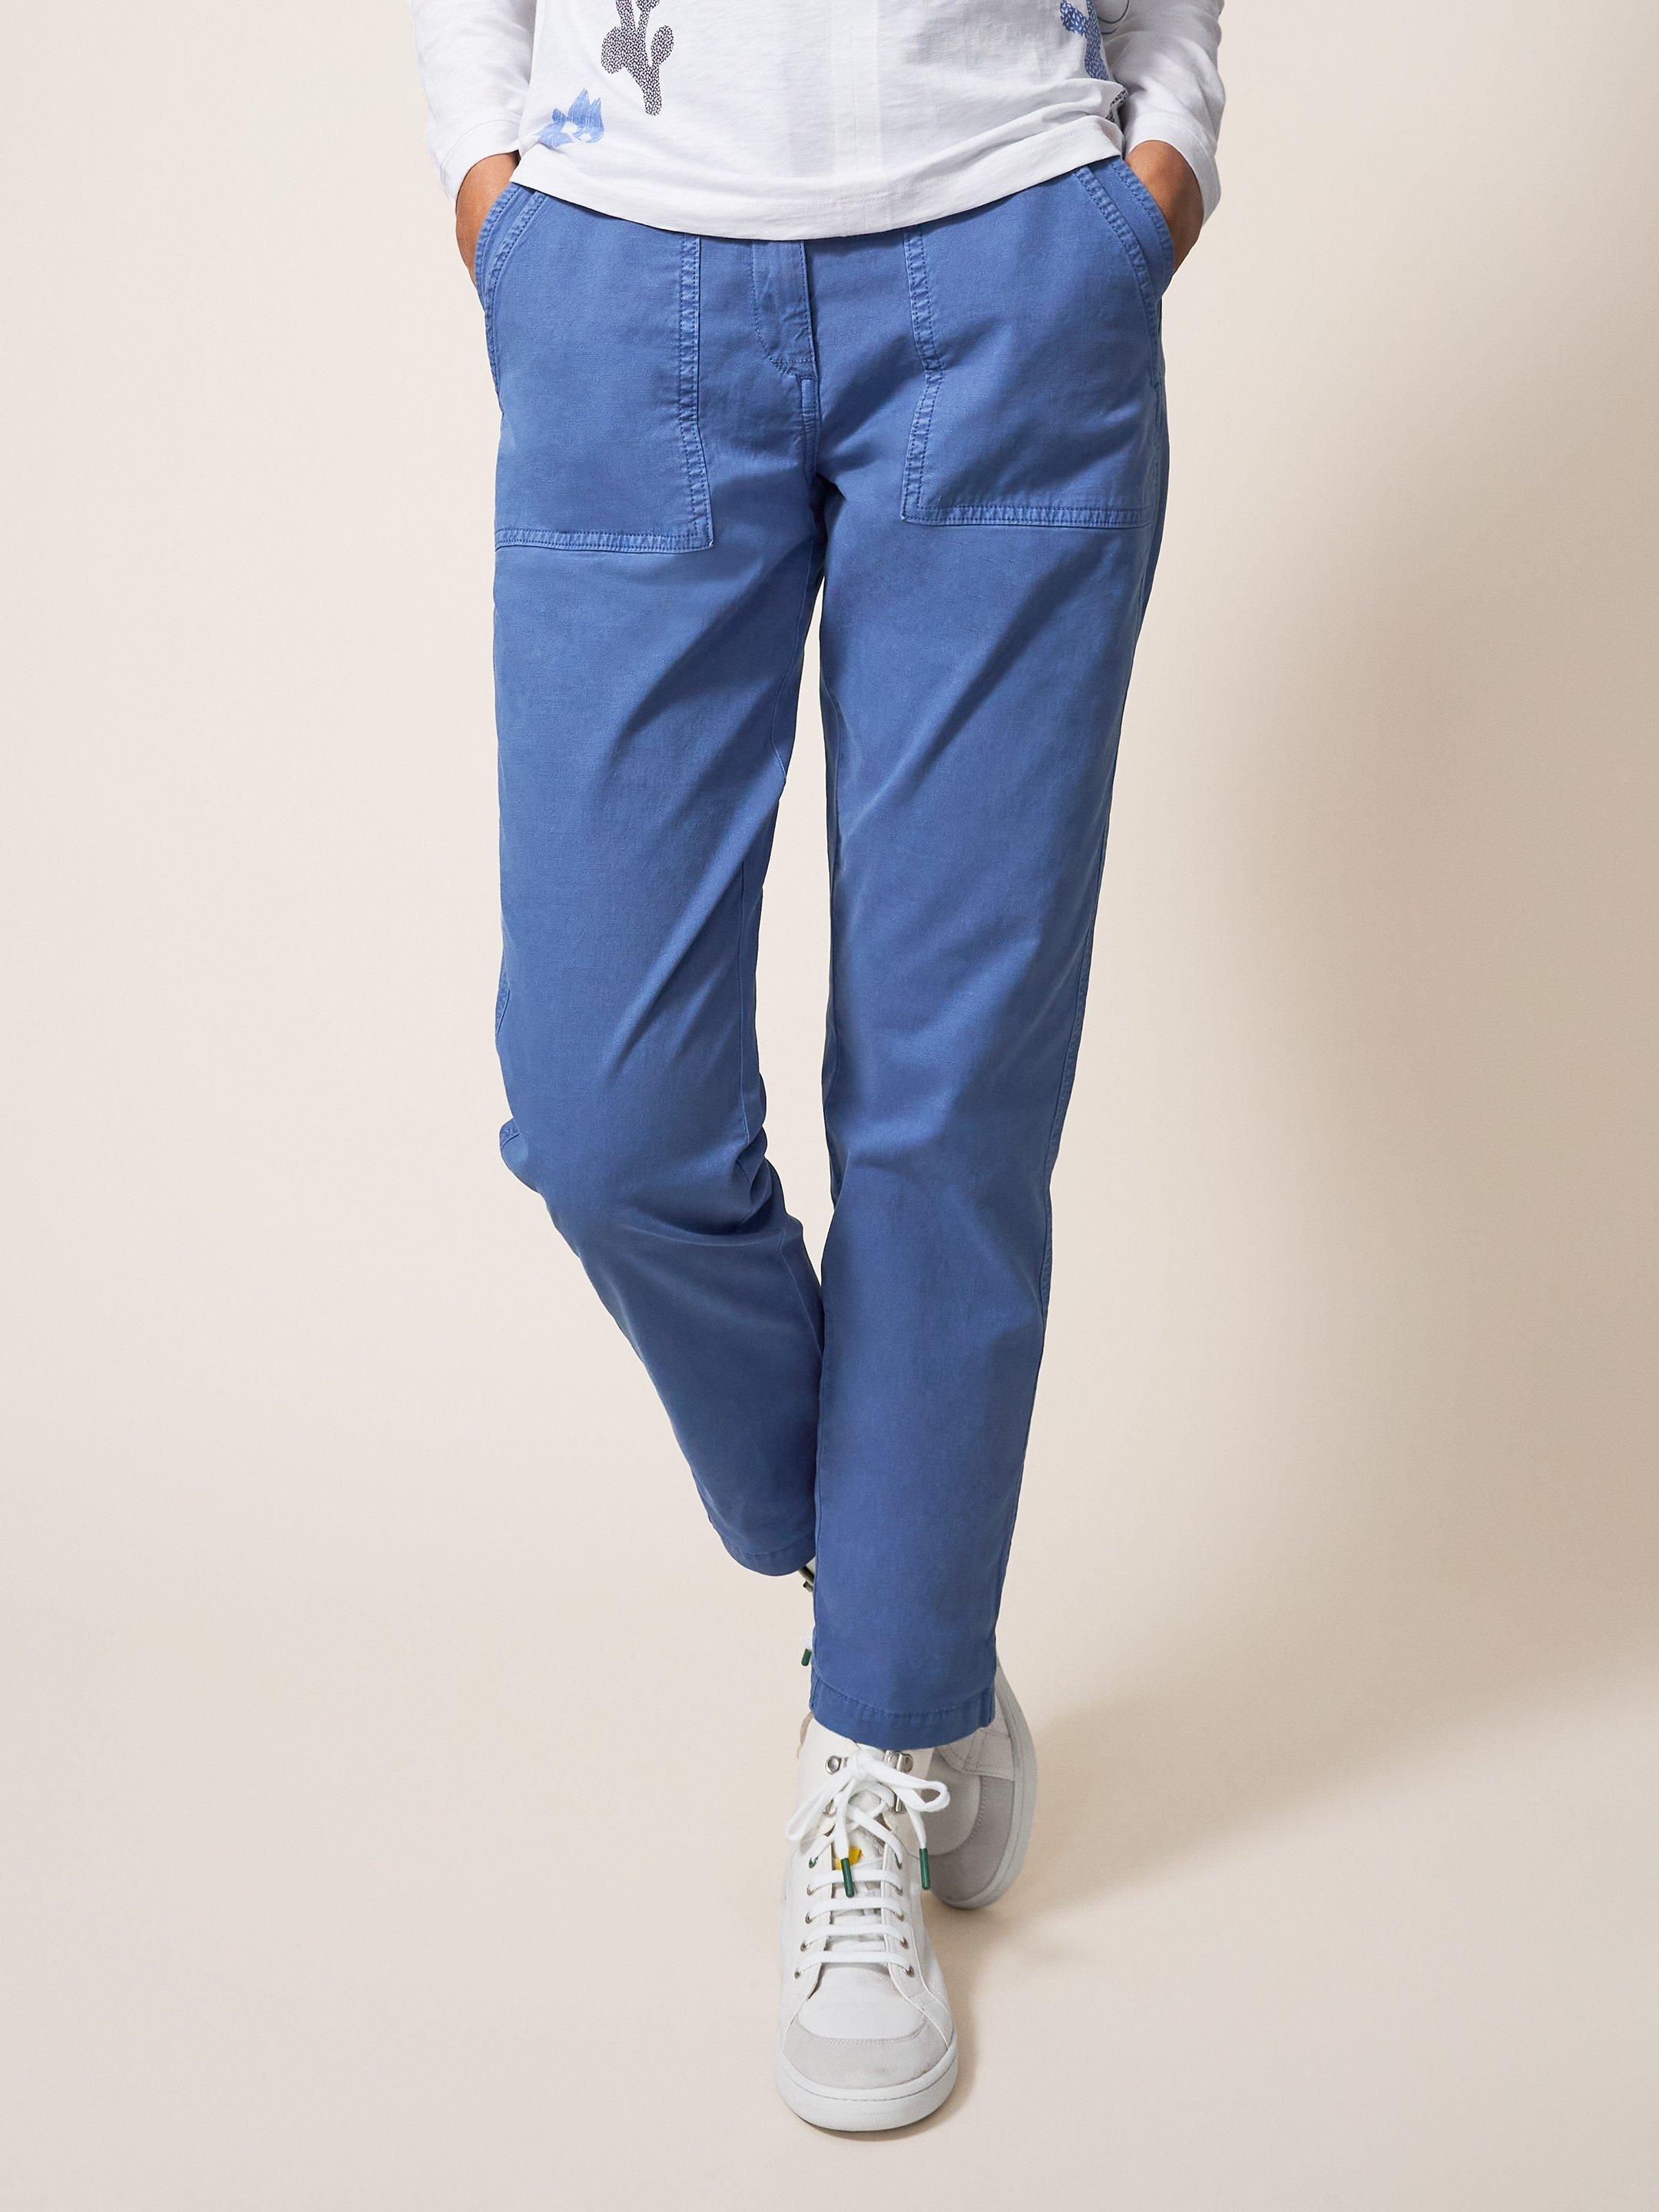 Twister Chino in MID BLUE - MODEL FRONT